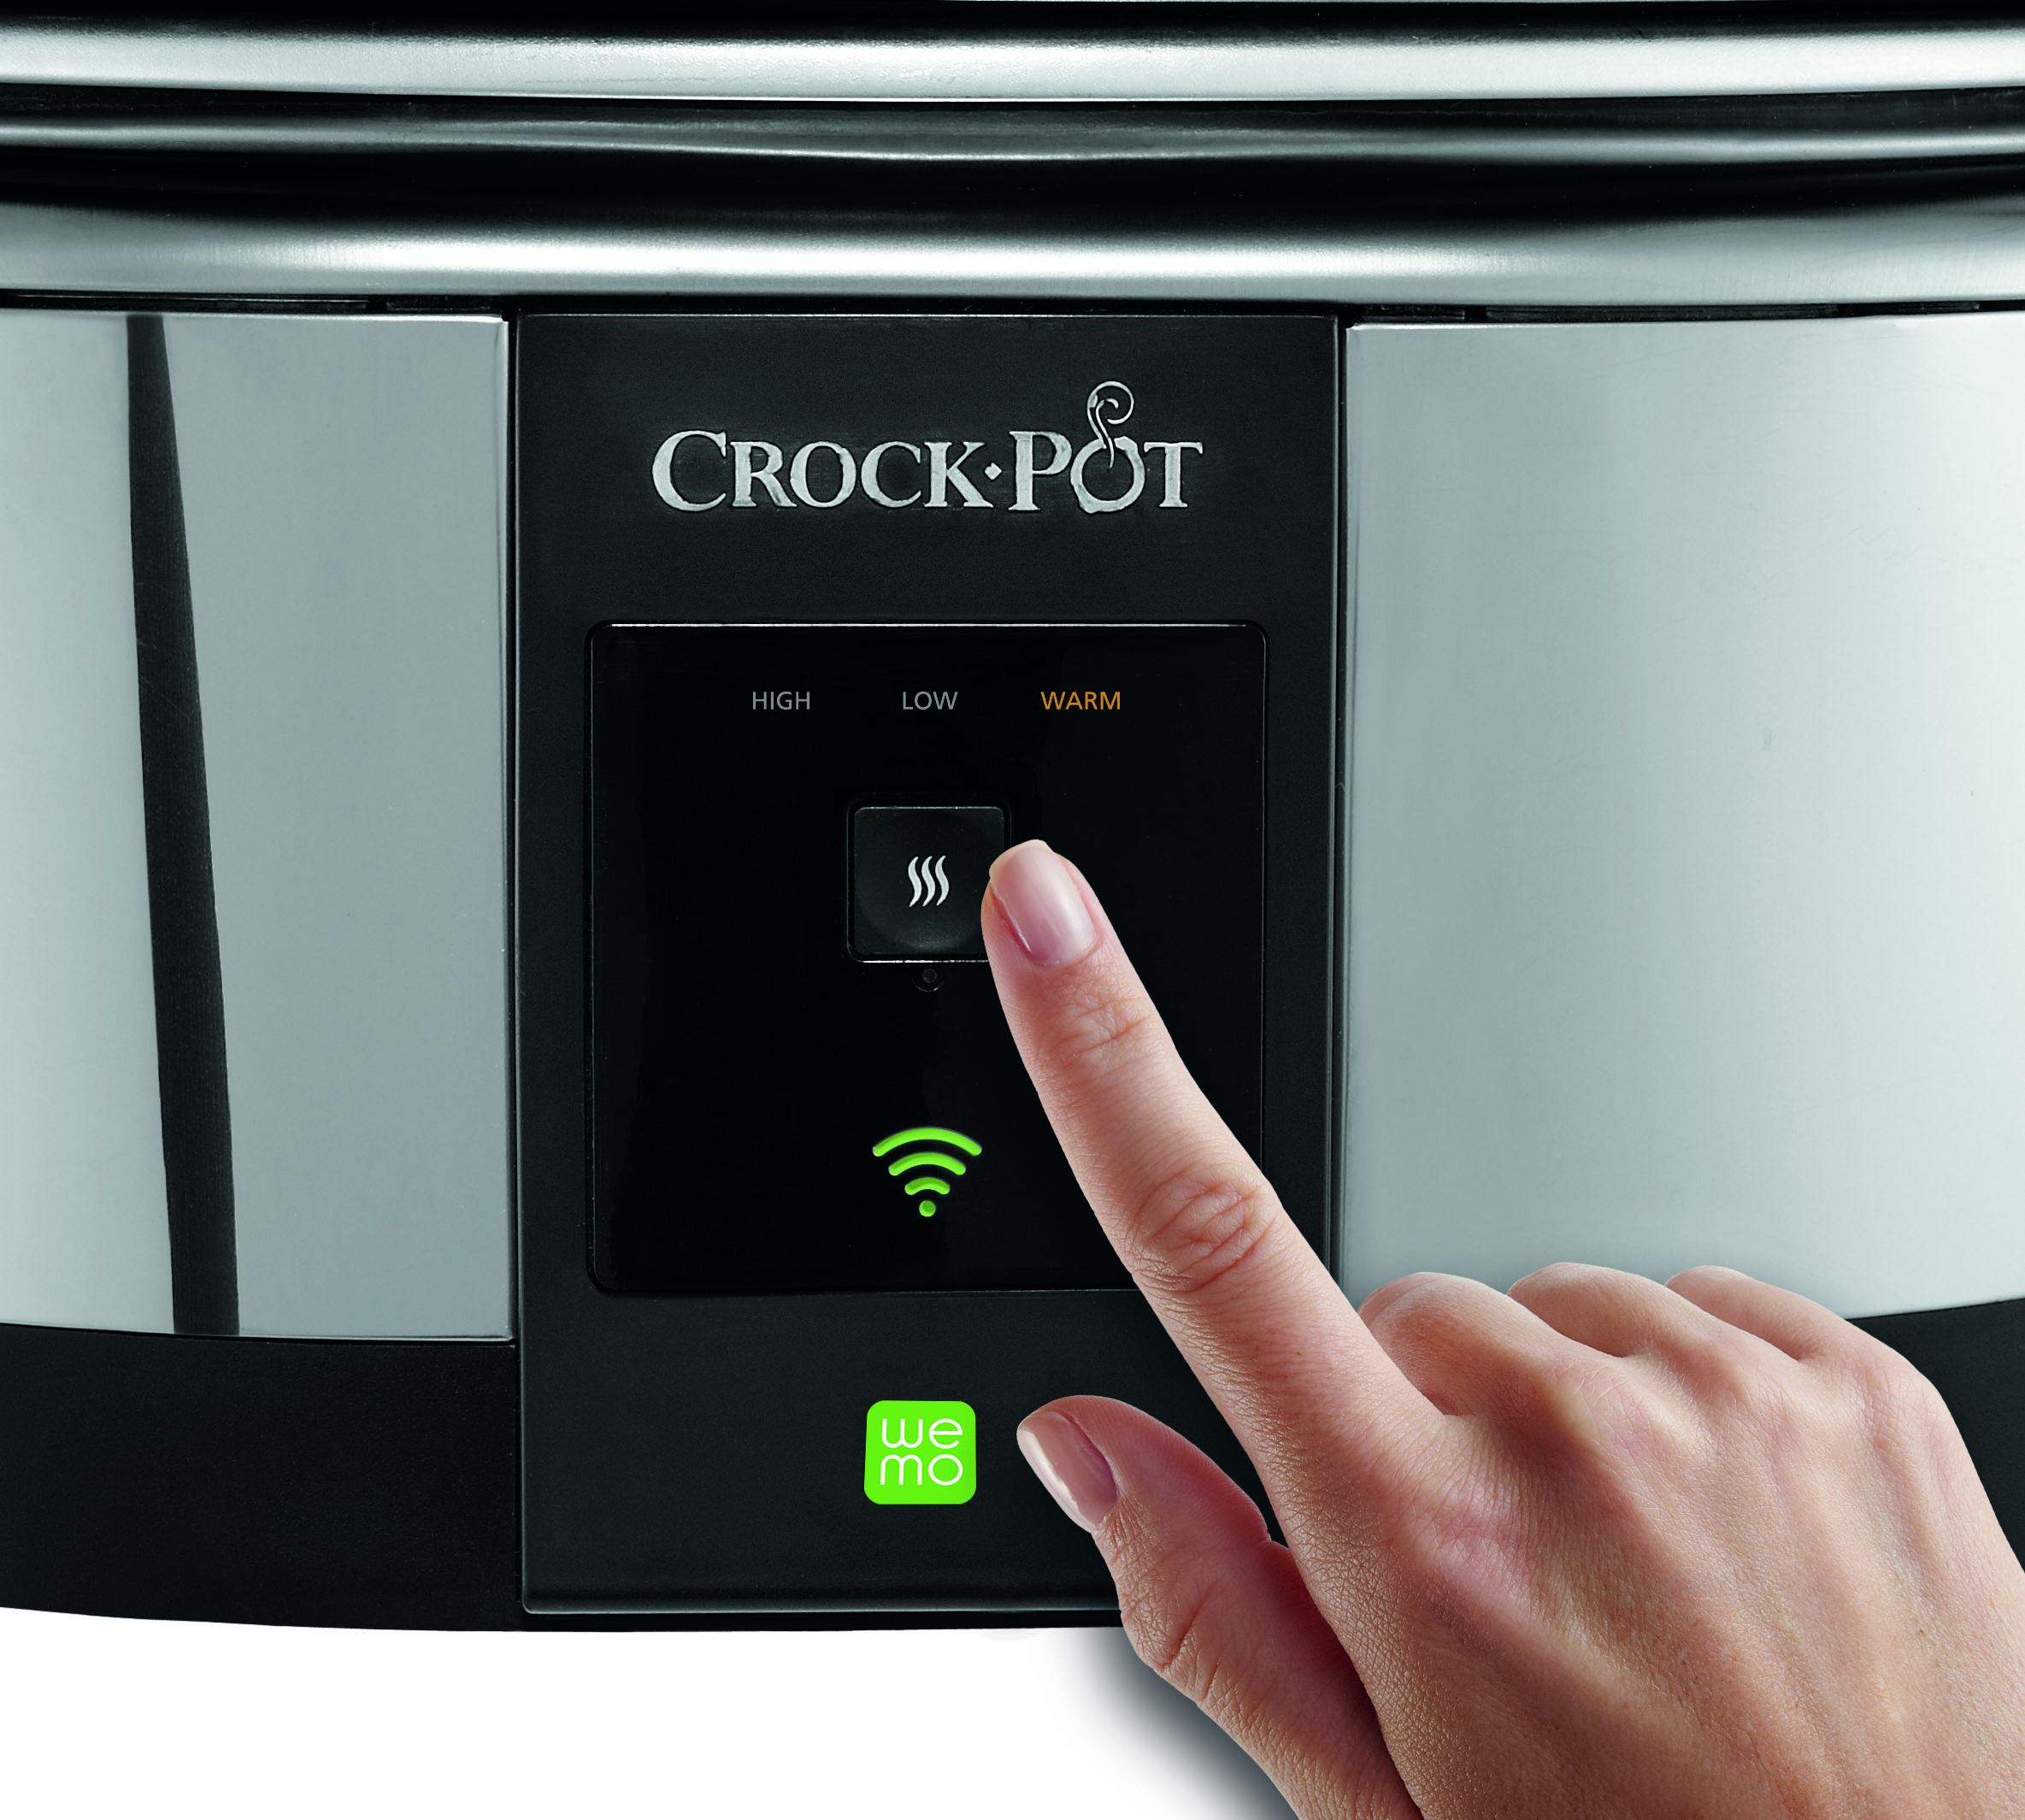 Crock-Pot Wifi-Controlled Smart Slow Cooker Enabled by WeMo, 6-Quart, Stainless Steel (SCCPWM600-V1) - image 3 of 8